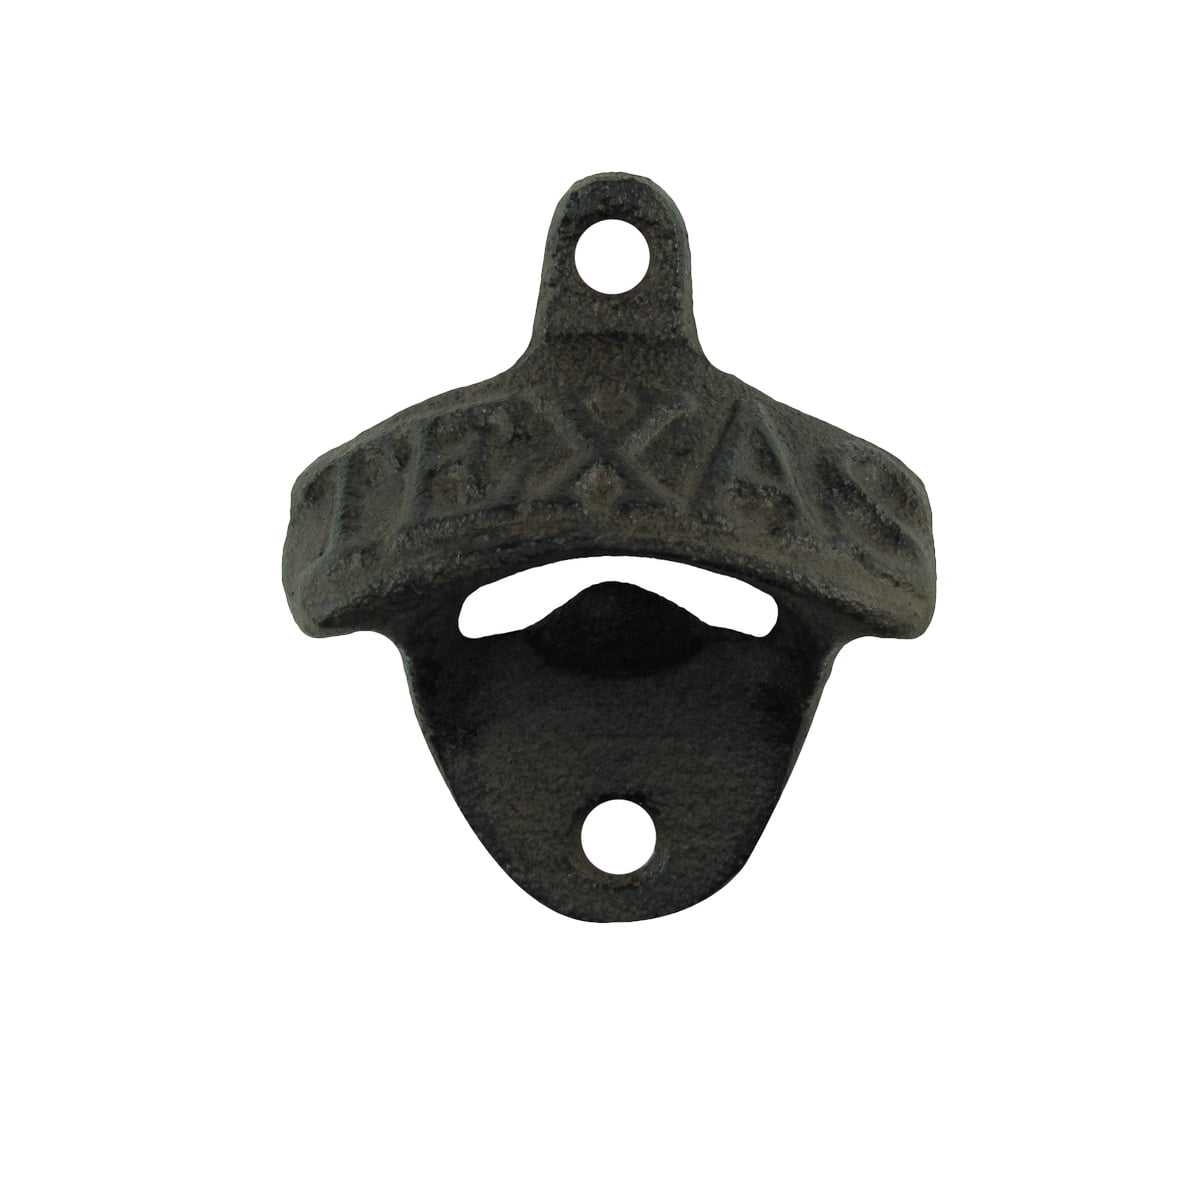 FIXINGS ** FREE P&P** 1 x BOTTLE OPENER 'BREW DOG' CAST IRON WALL MOUNTED 